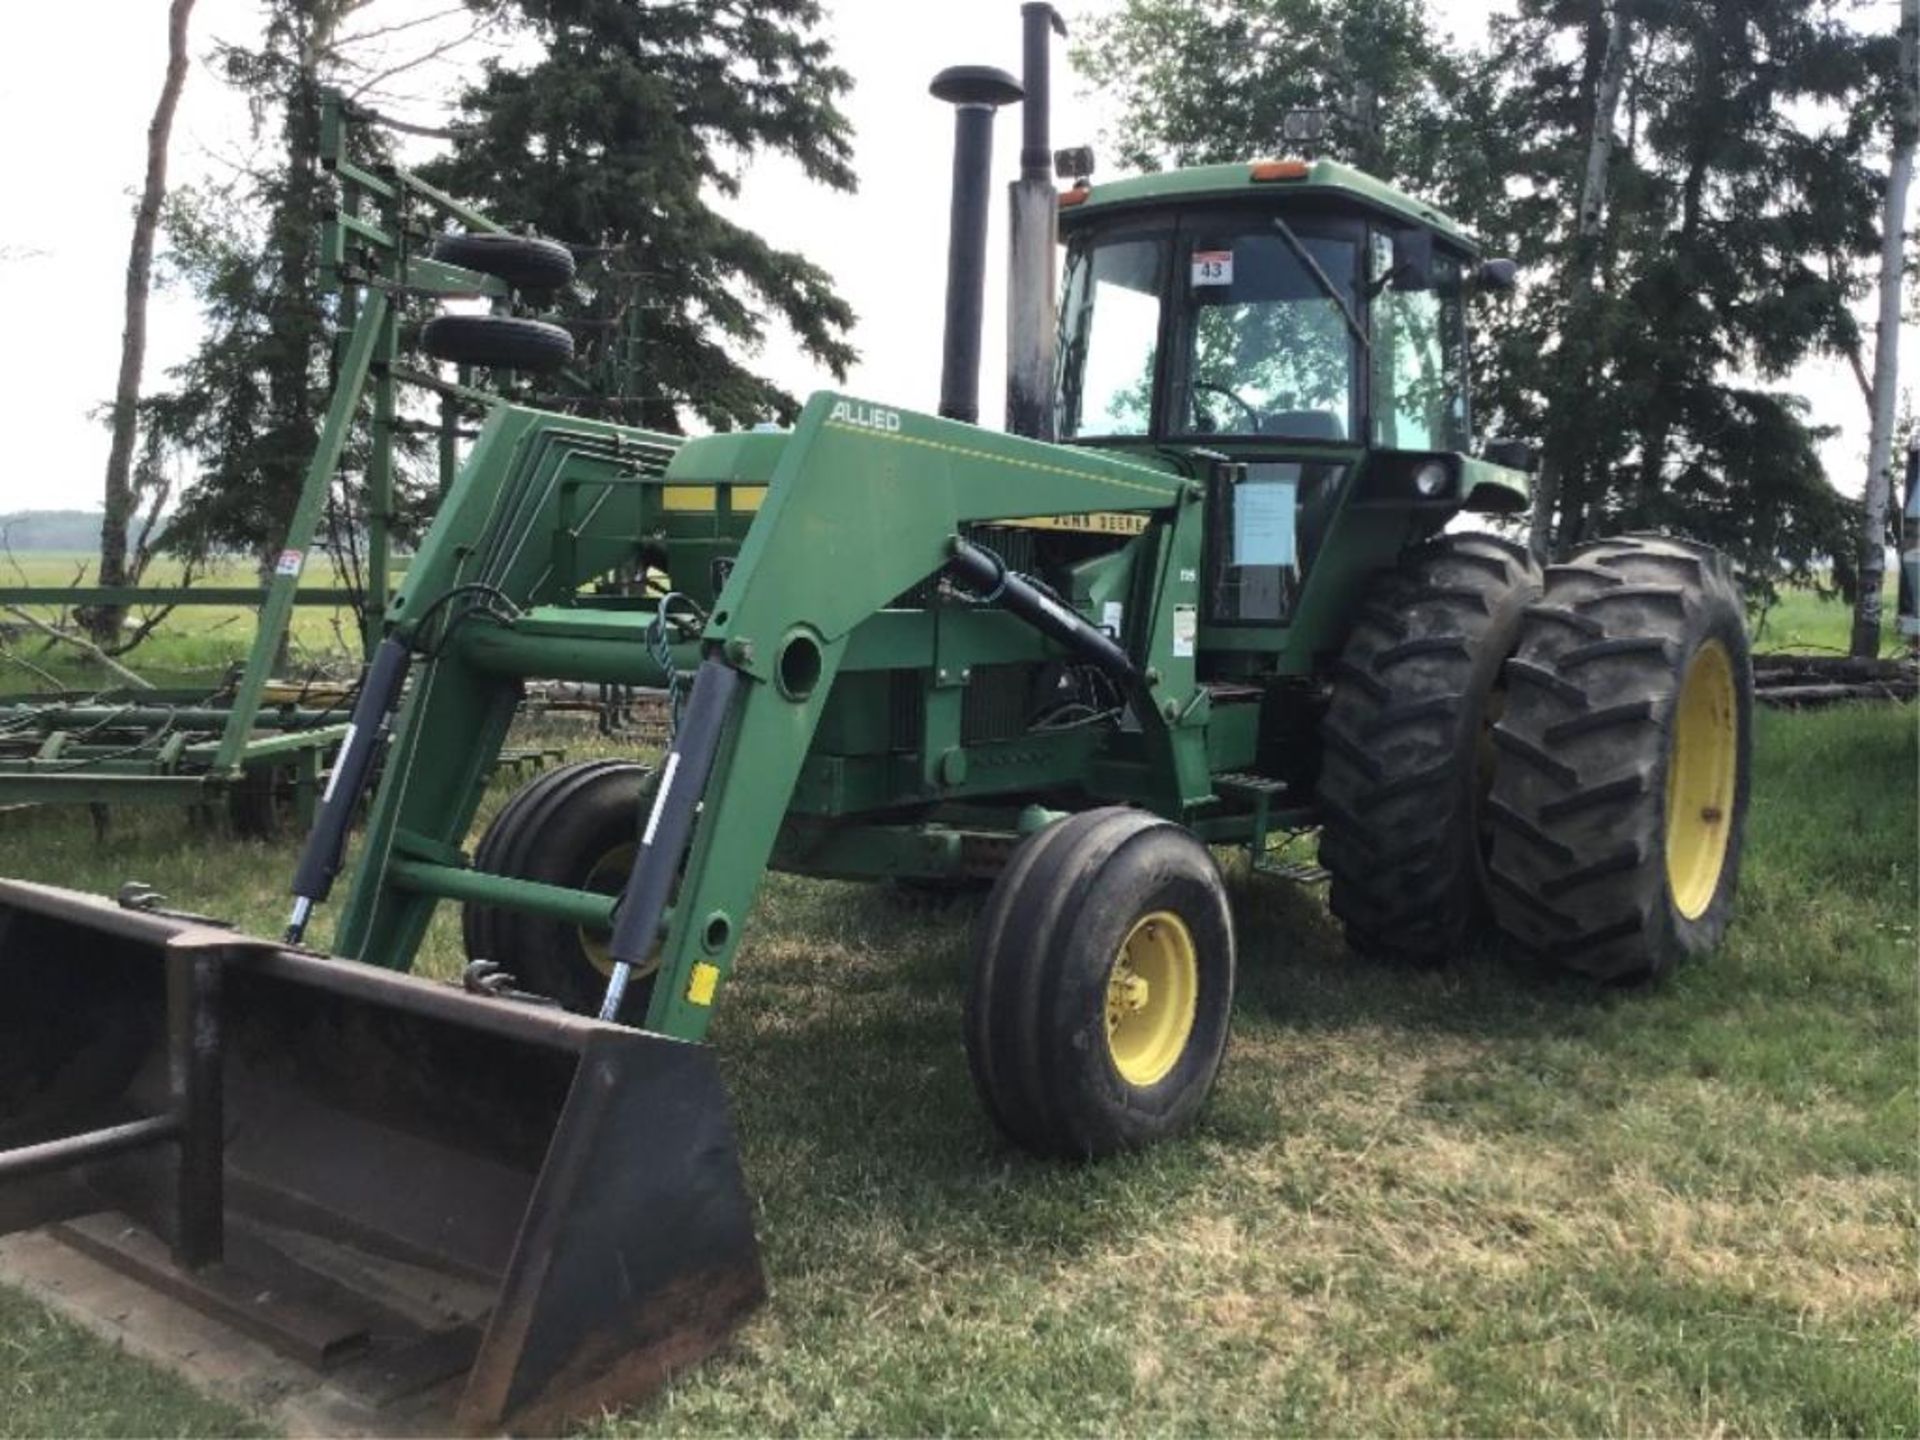 John Deere 4630 2wd Tractor 12543hrs, 20.8-38rr Duals, Drop in Eng 400hrs ago, (Has 795 Allied Front